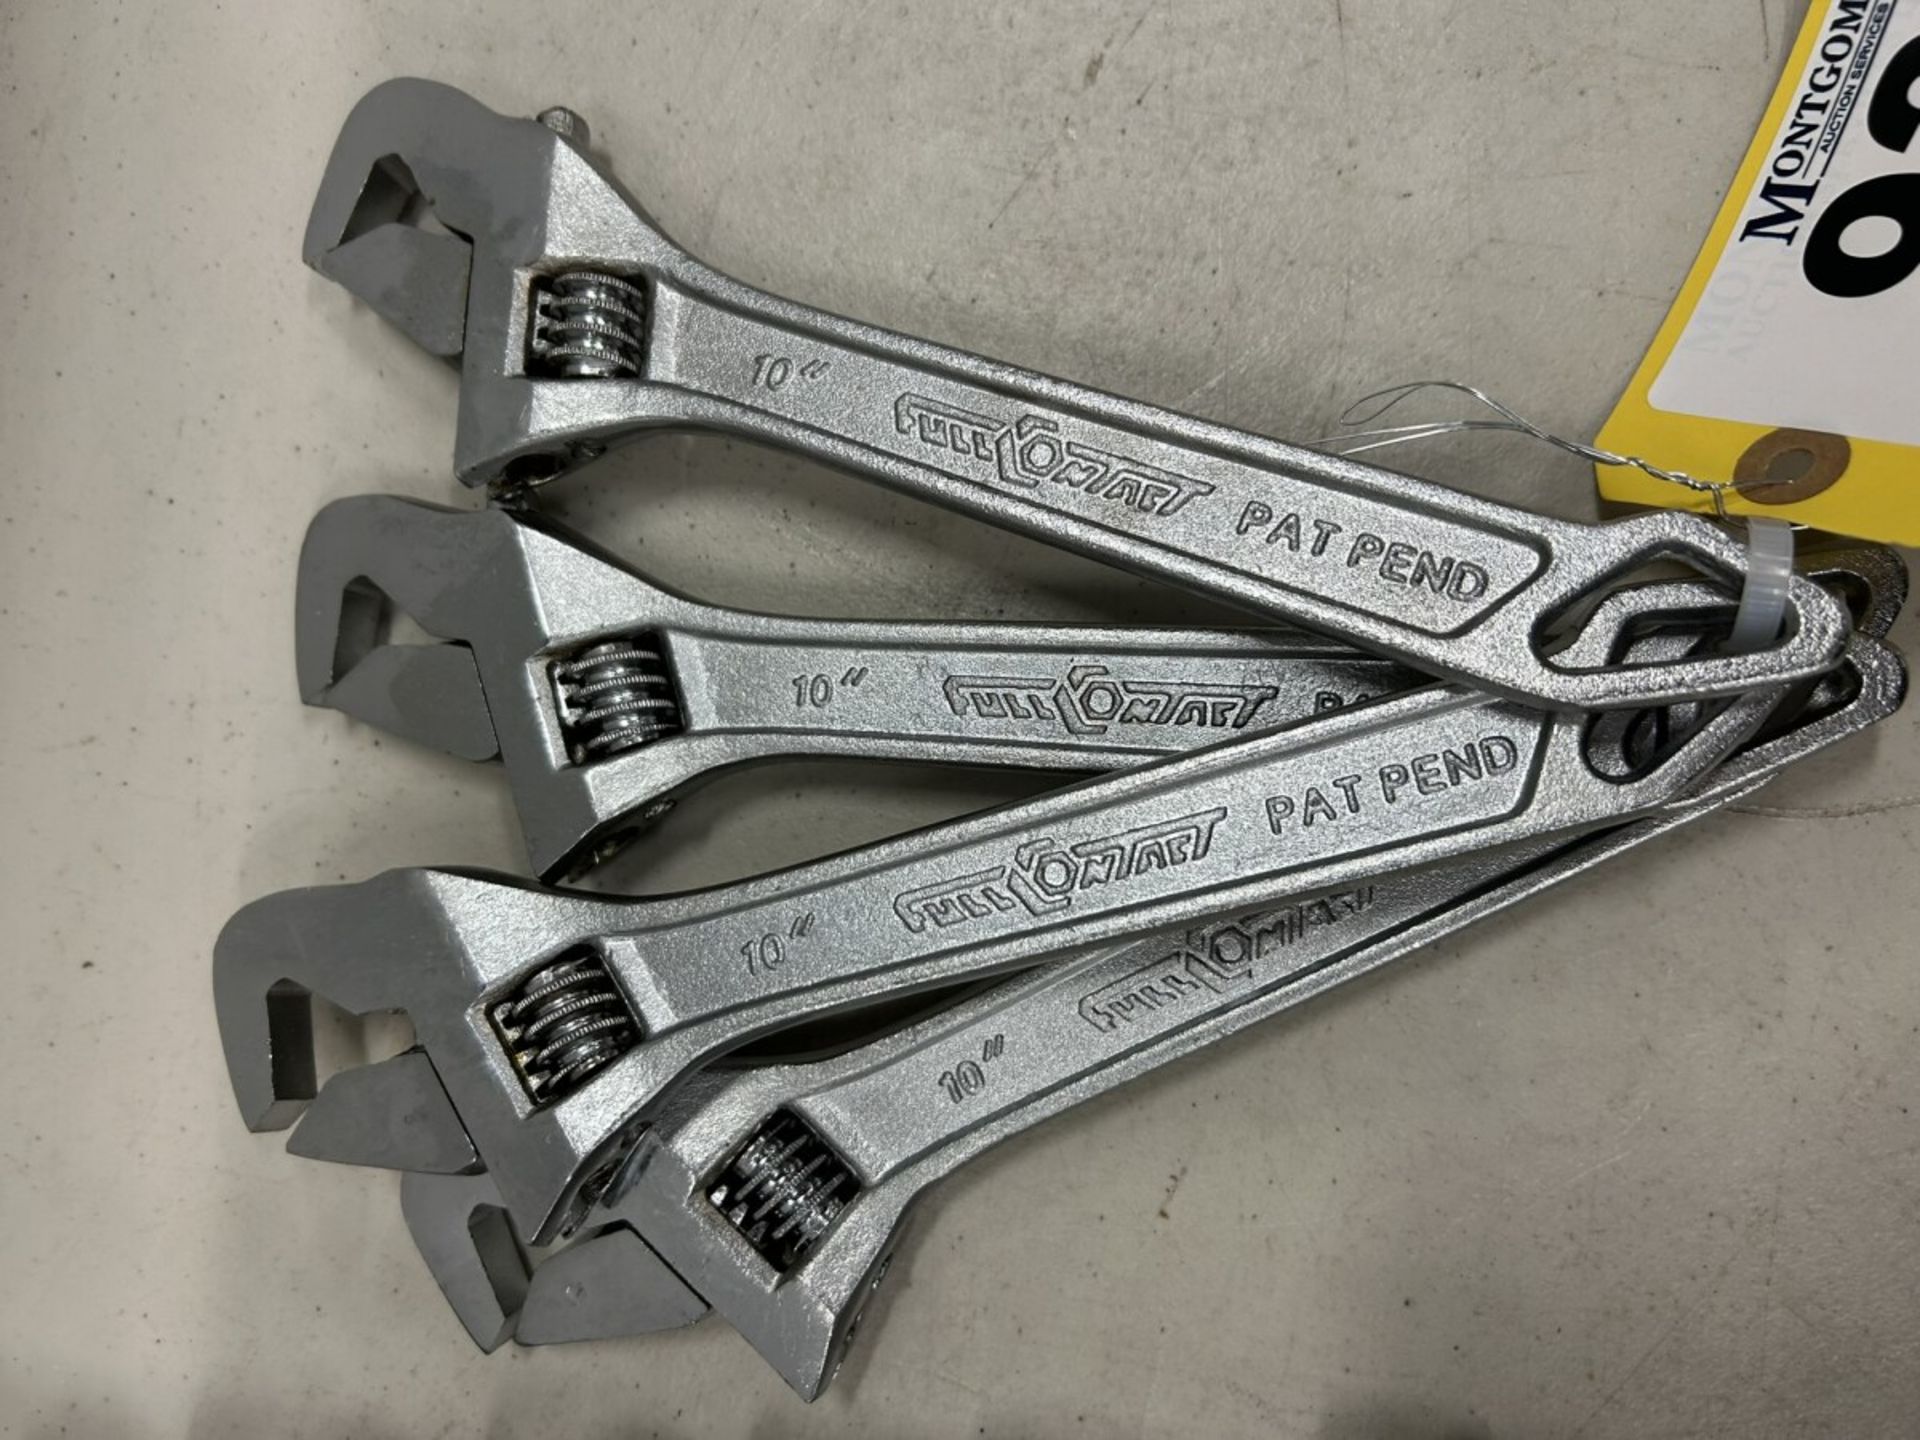 3/8" - 15/16" RATCHET RING SPANNER W/ 4 FULL CONTACT ADJUSTABLE WRENCHES - Image 3 of 4